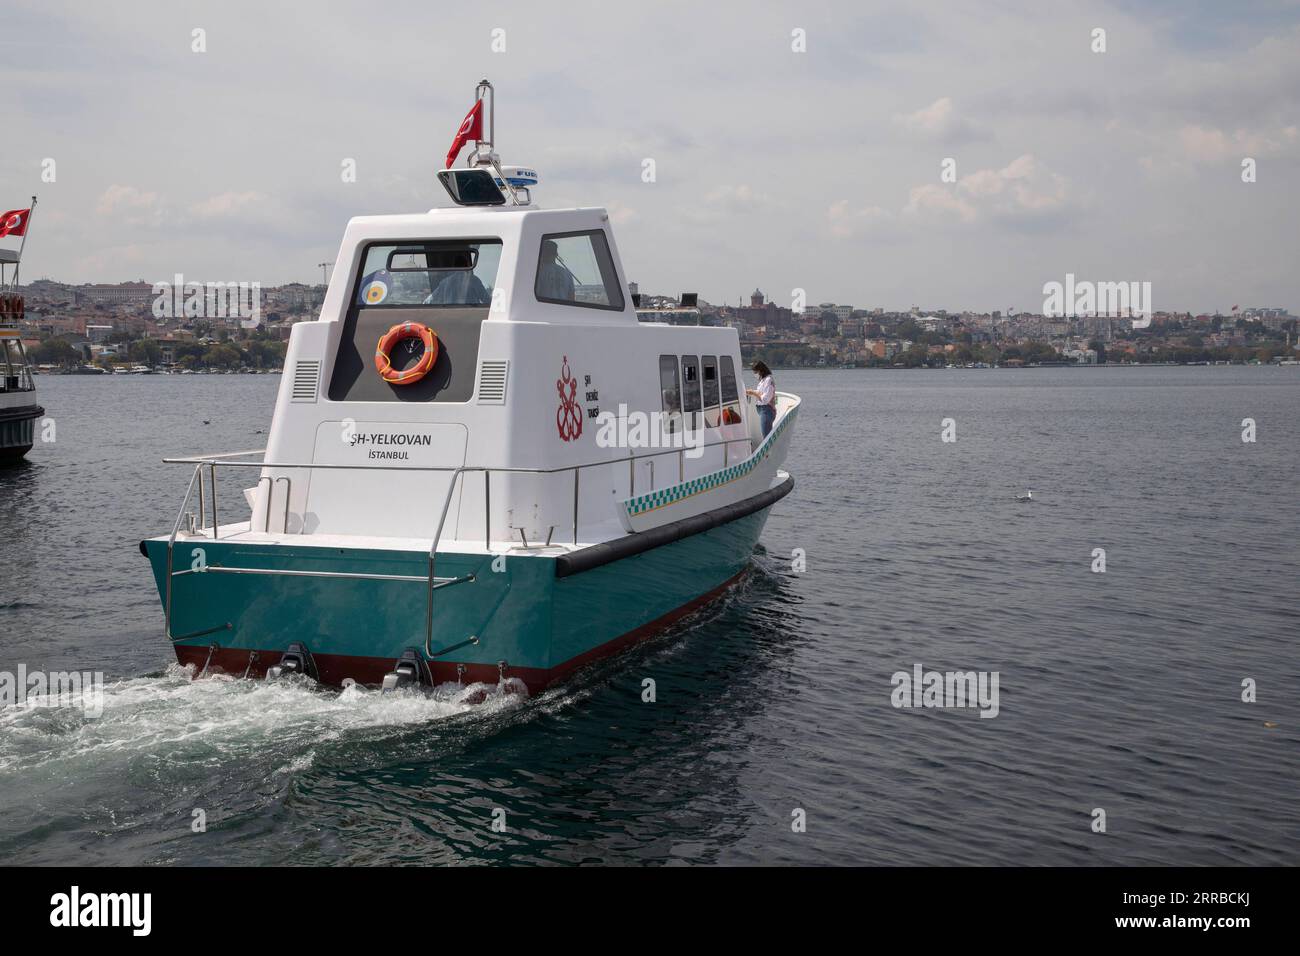 210914 -- ISTANBUL, Sept. 14, 2021 -- A sea taxi sails on waters off Istanbul, Turkey, on Sept. 13, 2021. Sinem Dedetas, head of the Istanbul City Lines, is hopeful that the newly produced sea taxis will help ease traffic chaos in the city. Photo by /Xinhua TO GO WITH Feature: Sea taxis expected to ease traffic jams in Turkey s Istanbul TURKEY-ISTANBUL-SEA TAXI OsmanxOrsal PUBLICATIONxNOTxINxCHN Stock Photo